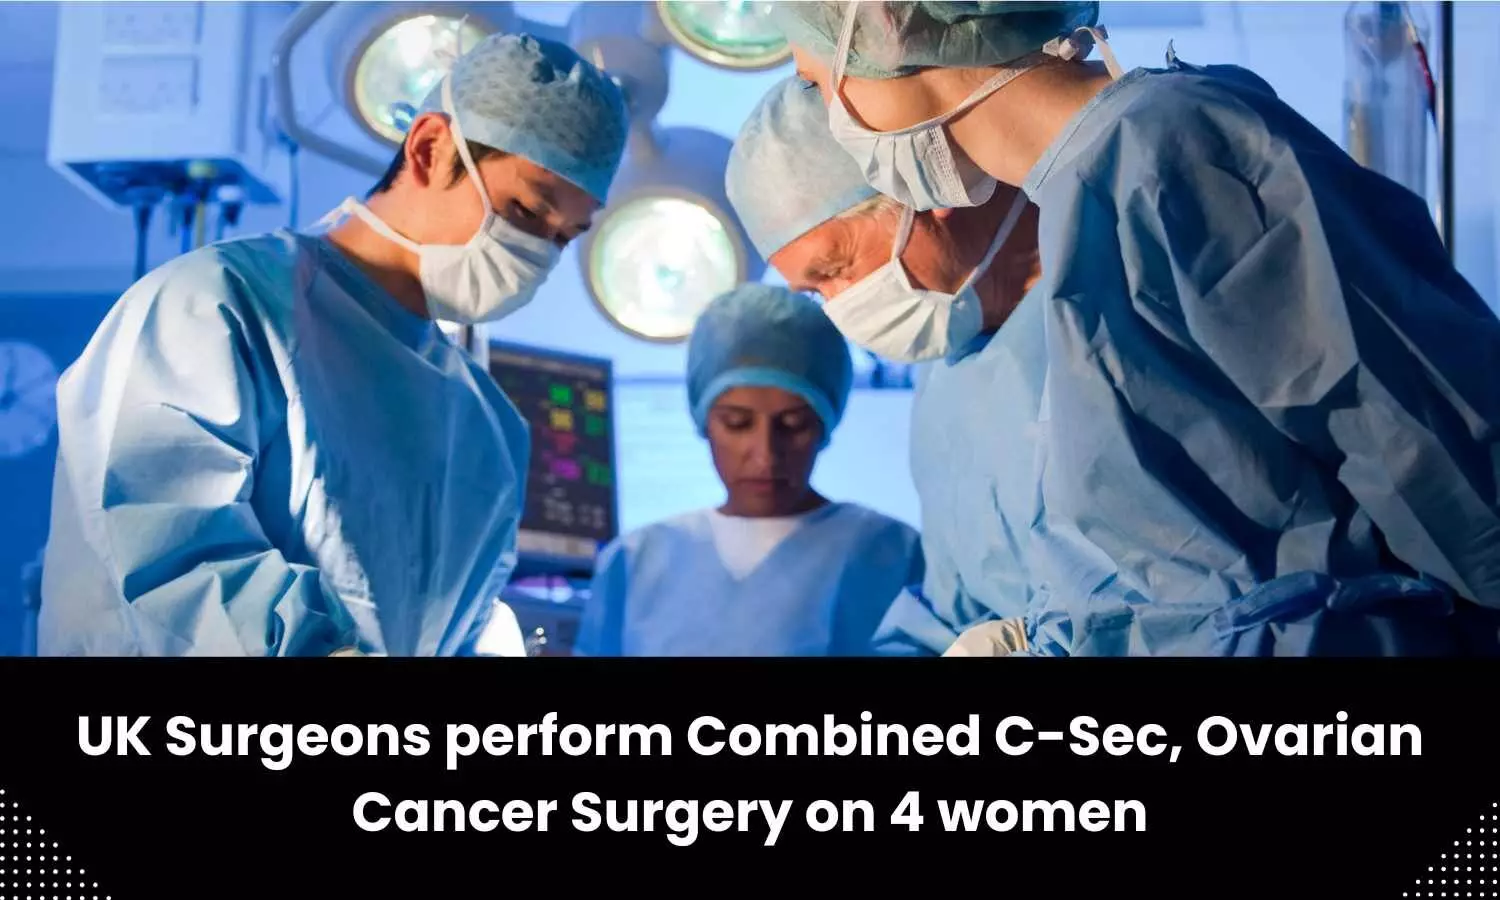 Combined C-Sec, Ovarian Cancer Surgery performed on 4 women by UK surgeons